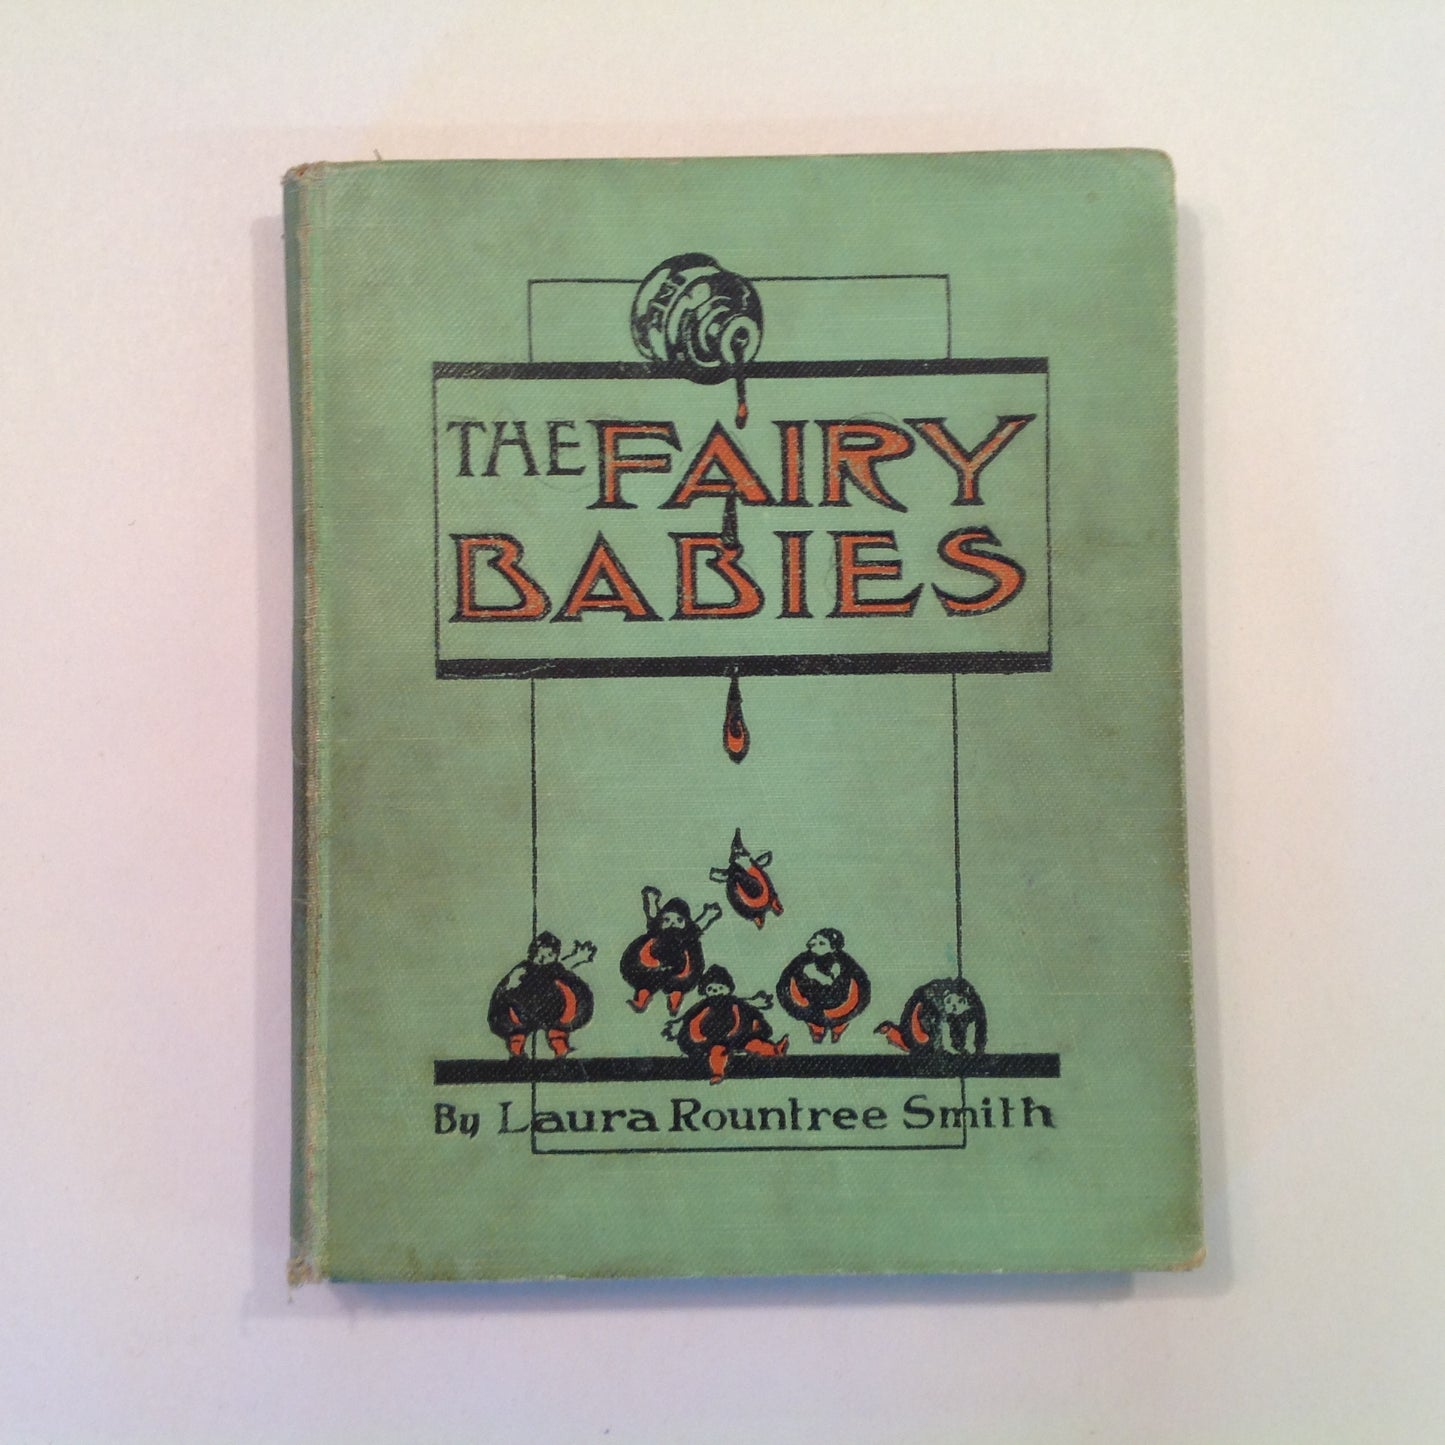 Vintage 1924 Children's Hardcover The Fairy Babies Laura Rountree Smith